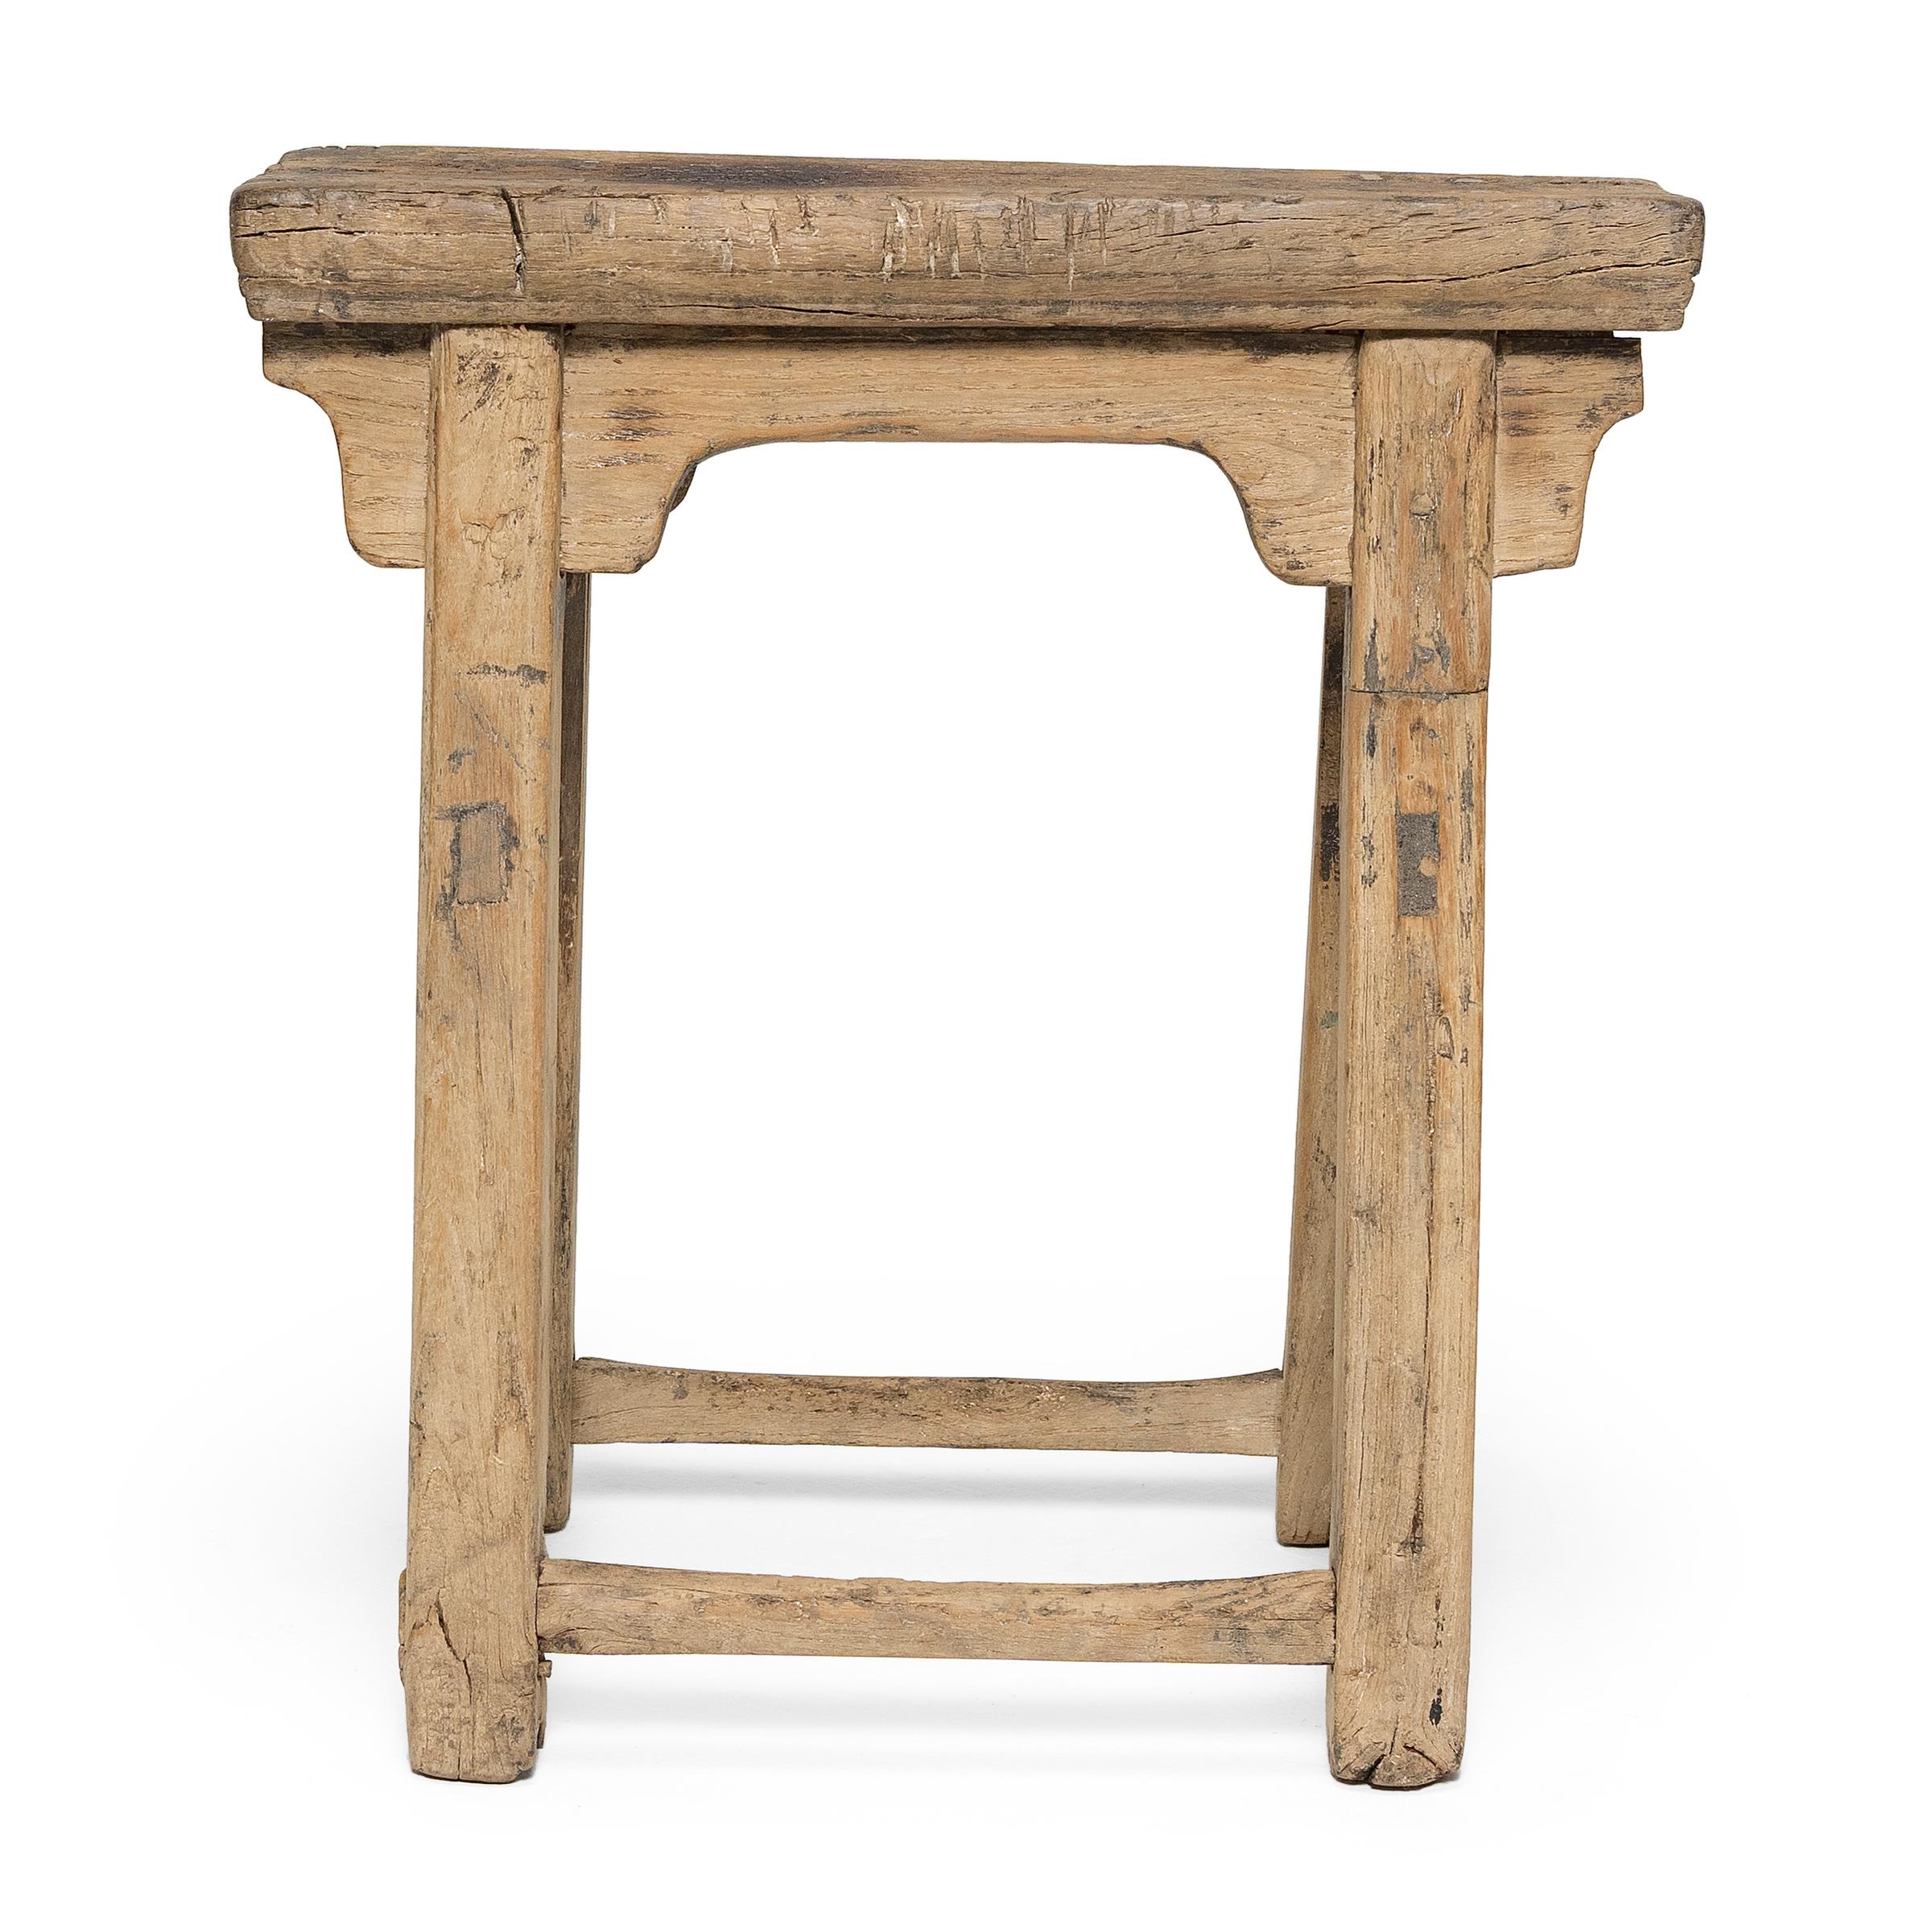 More portable than chairs, stools were a versatile seating option for Qing-dynasty scholars, nobles, and peasants alike. This provincial stool dates to the turn of the century and would have been used throughout a courtyard home as versatile